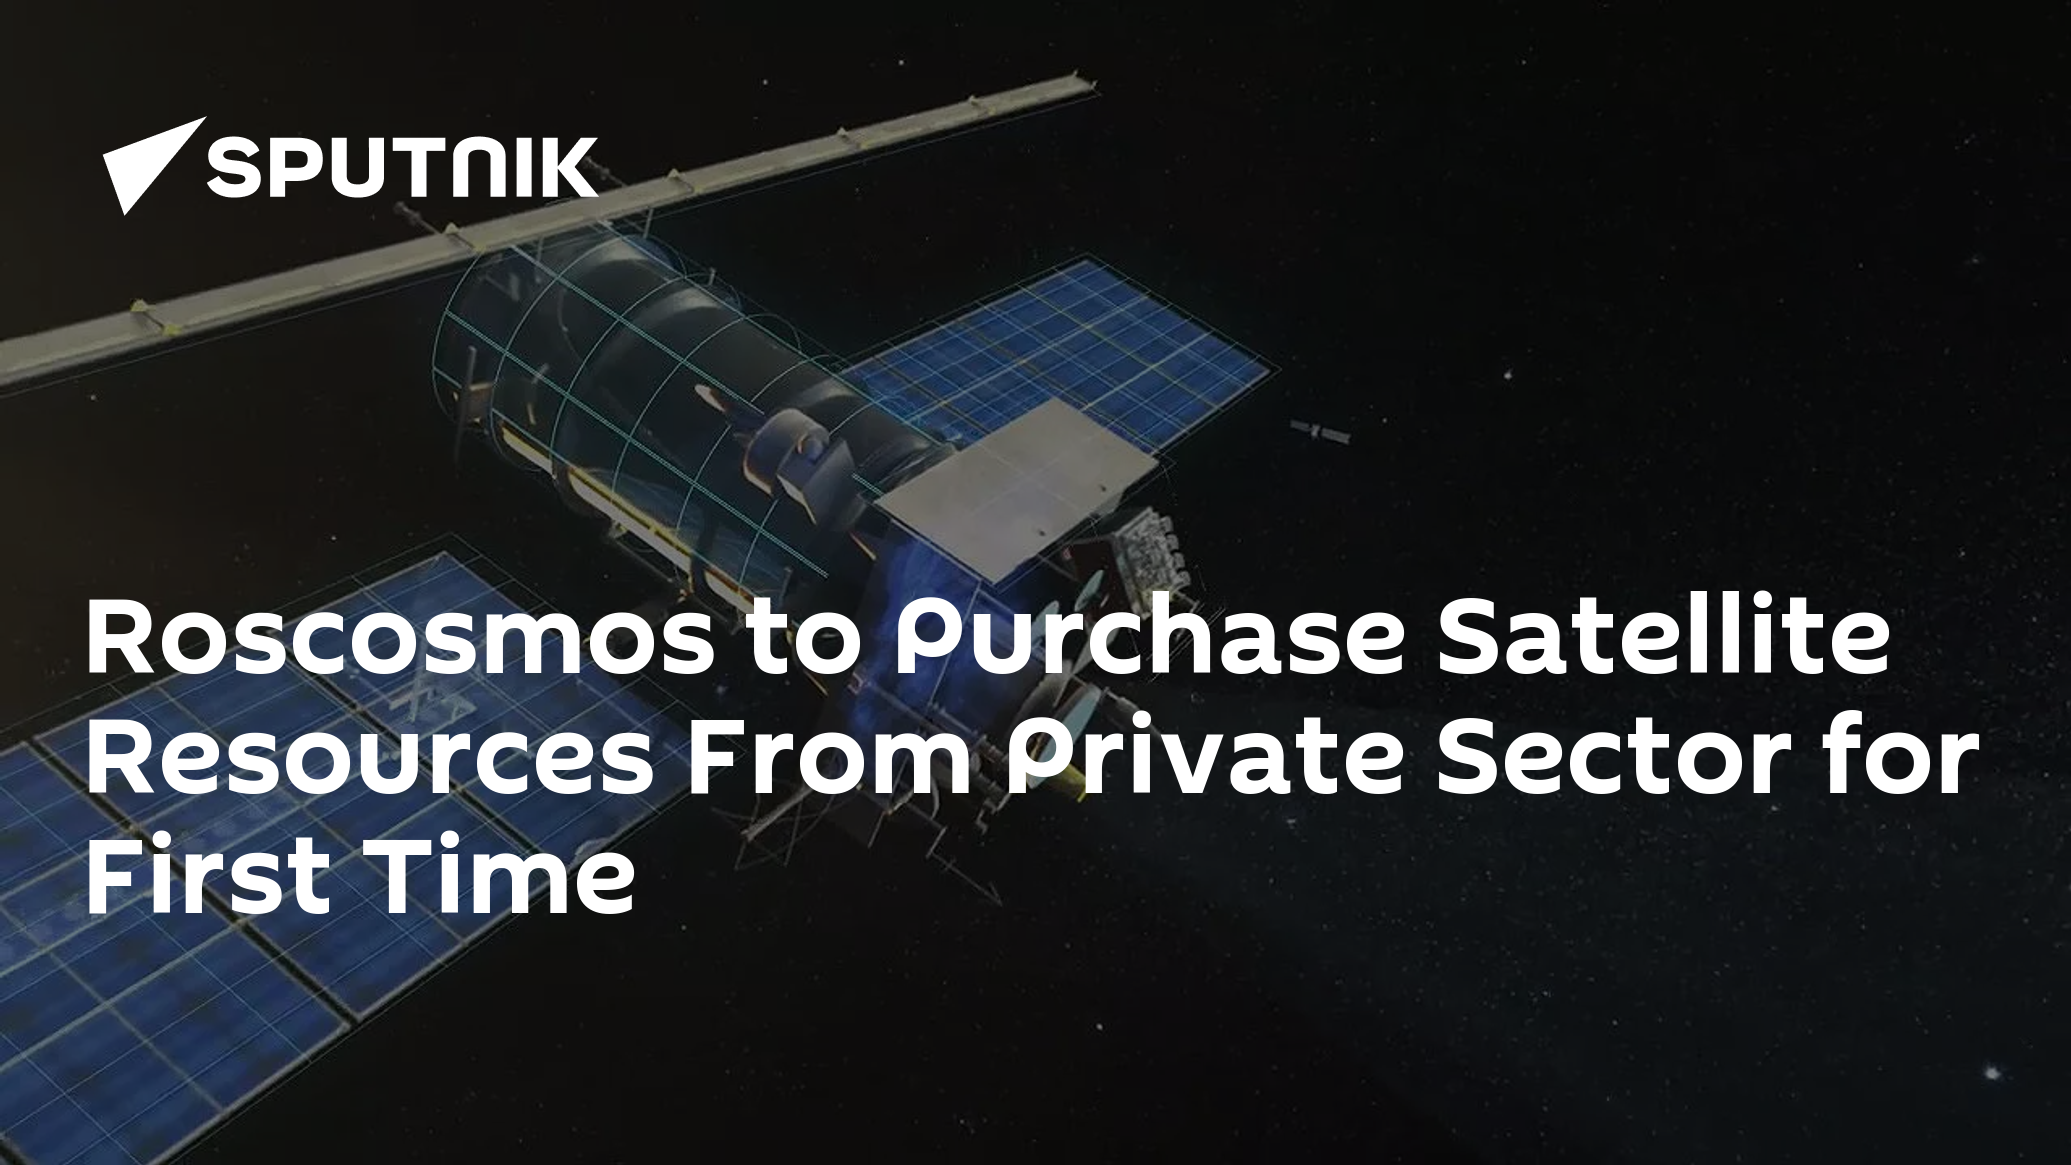 Roscosmos to Purchase Satellite Resources From Private Sector for First Time